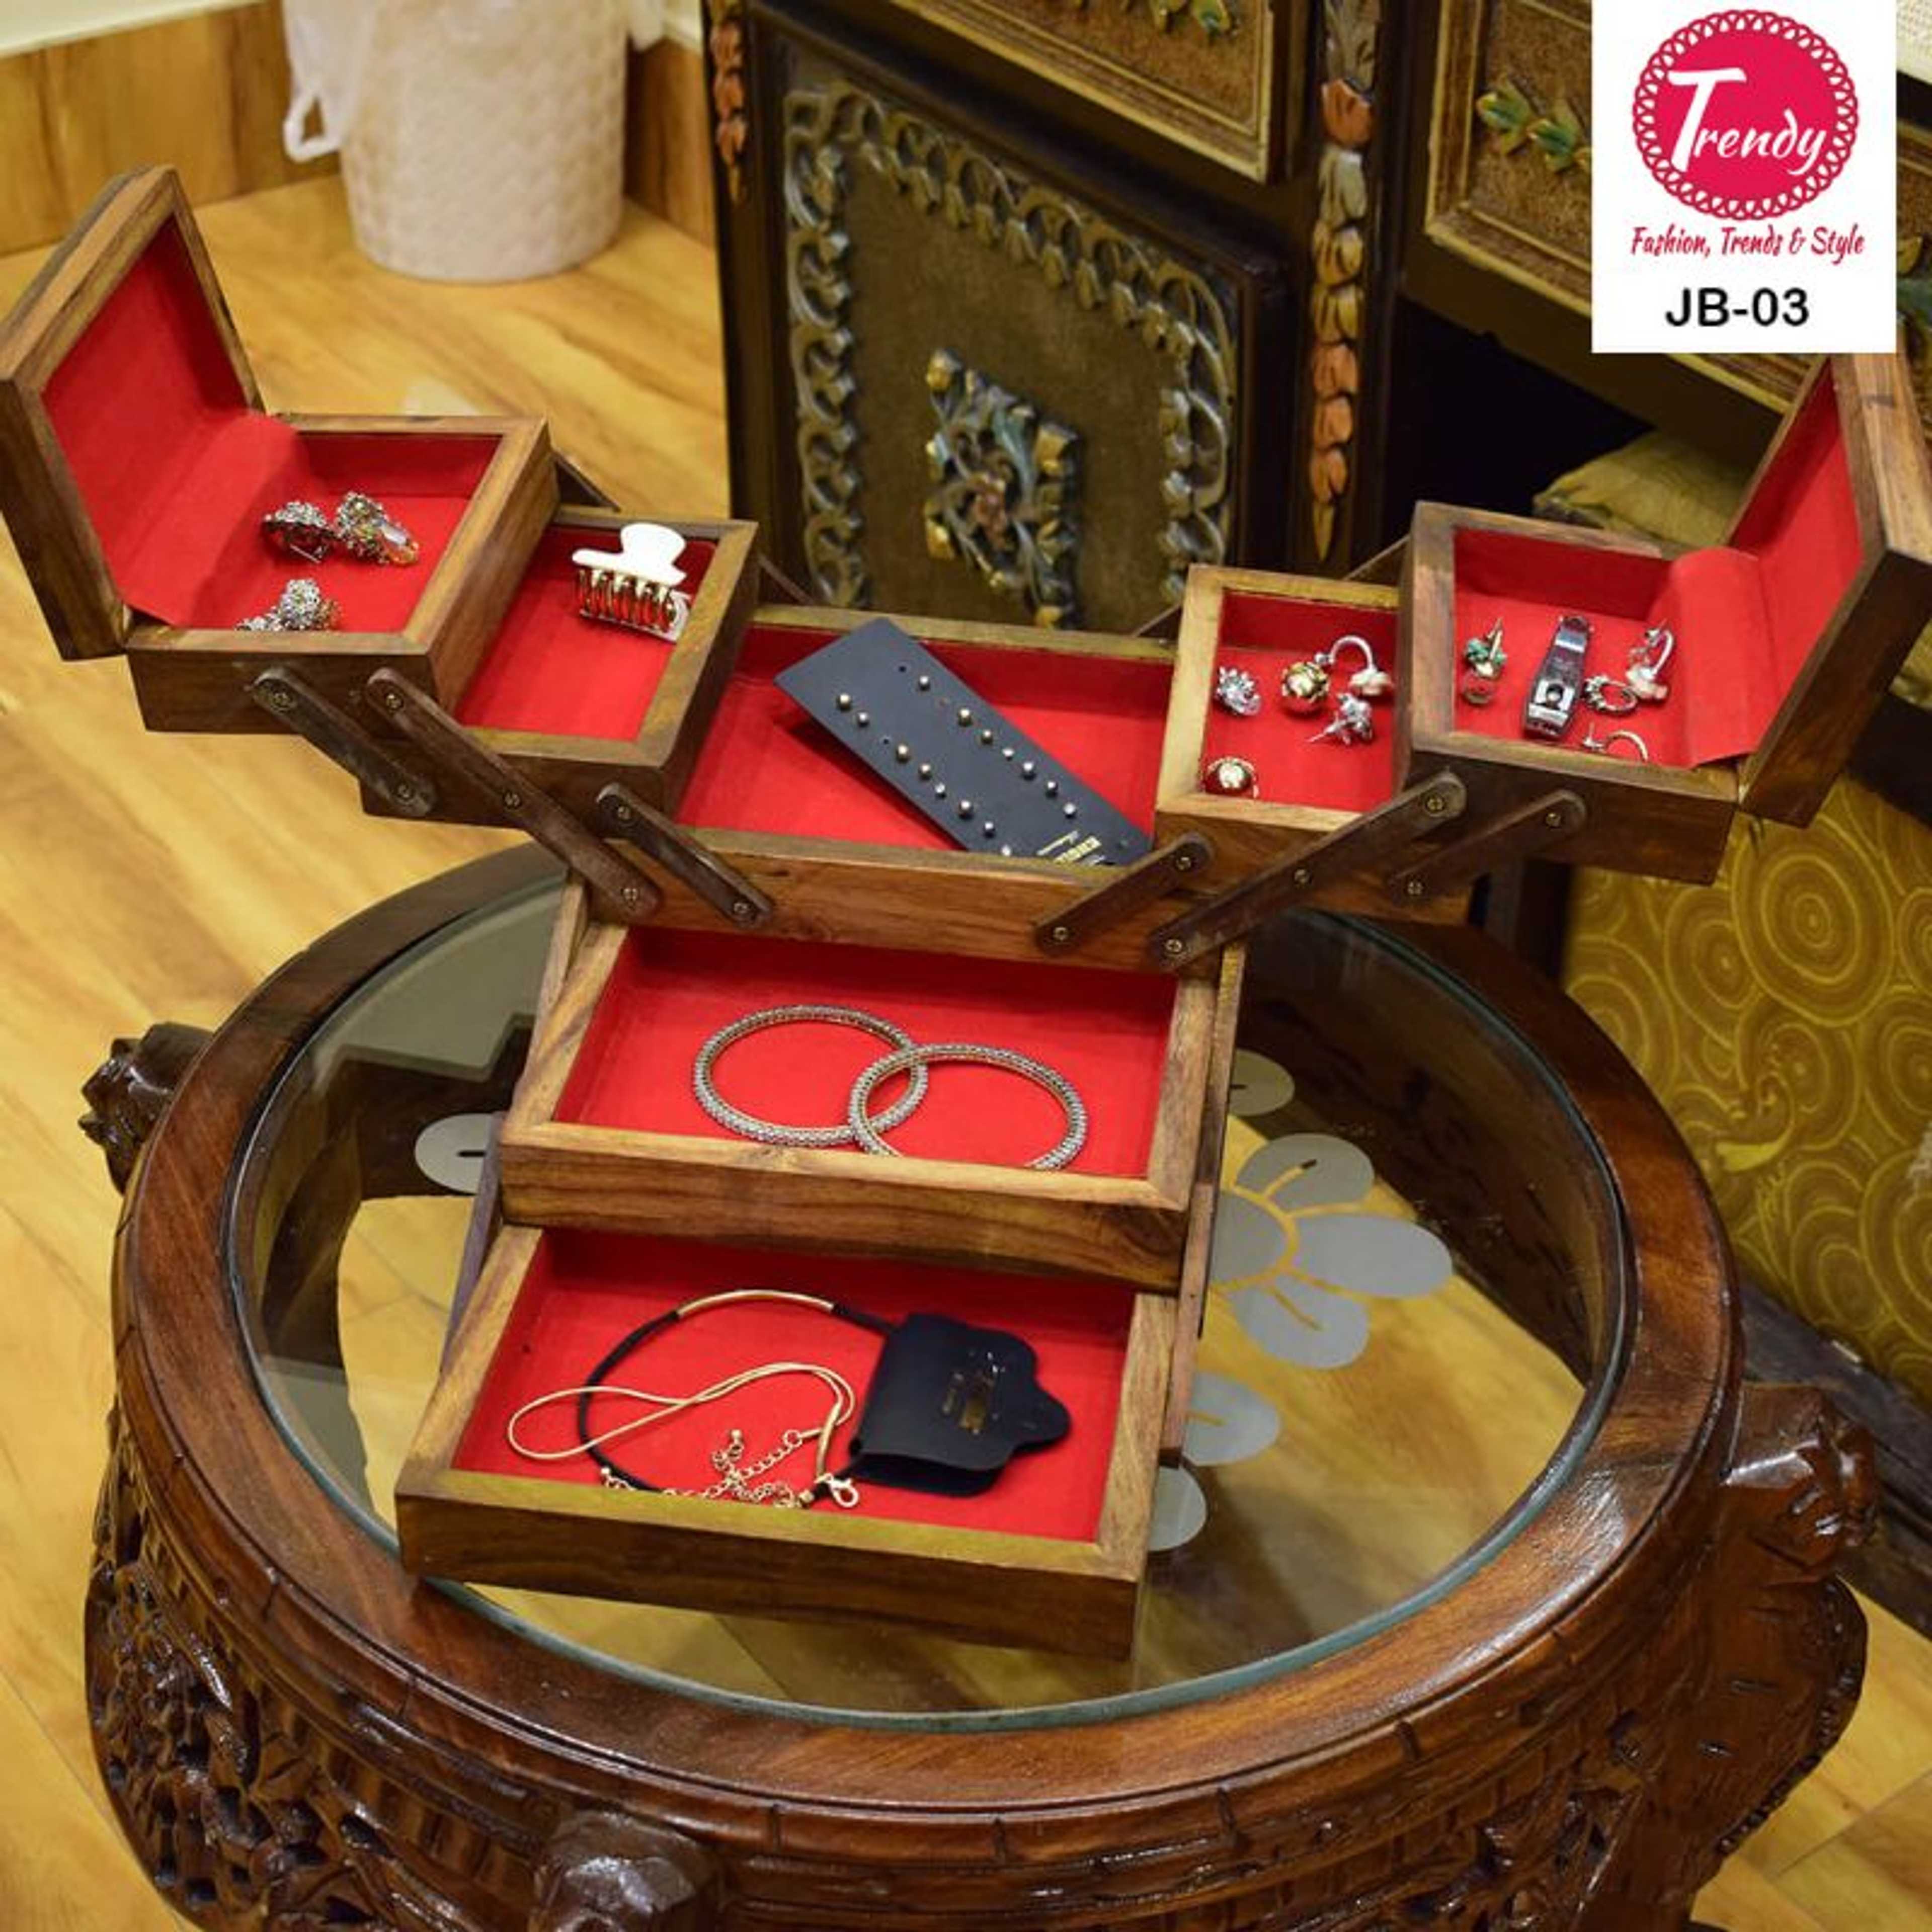 Hand Crafted Multi Portion Hexagonal Wooden Jewelry Box JB-03